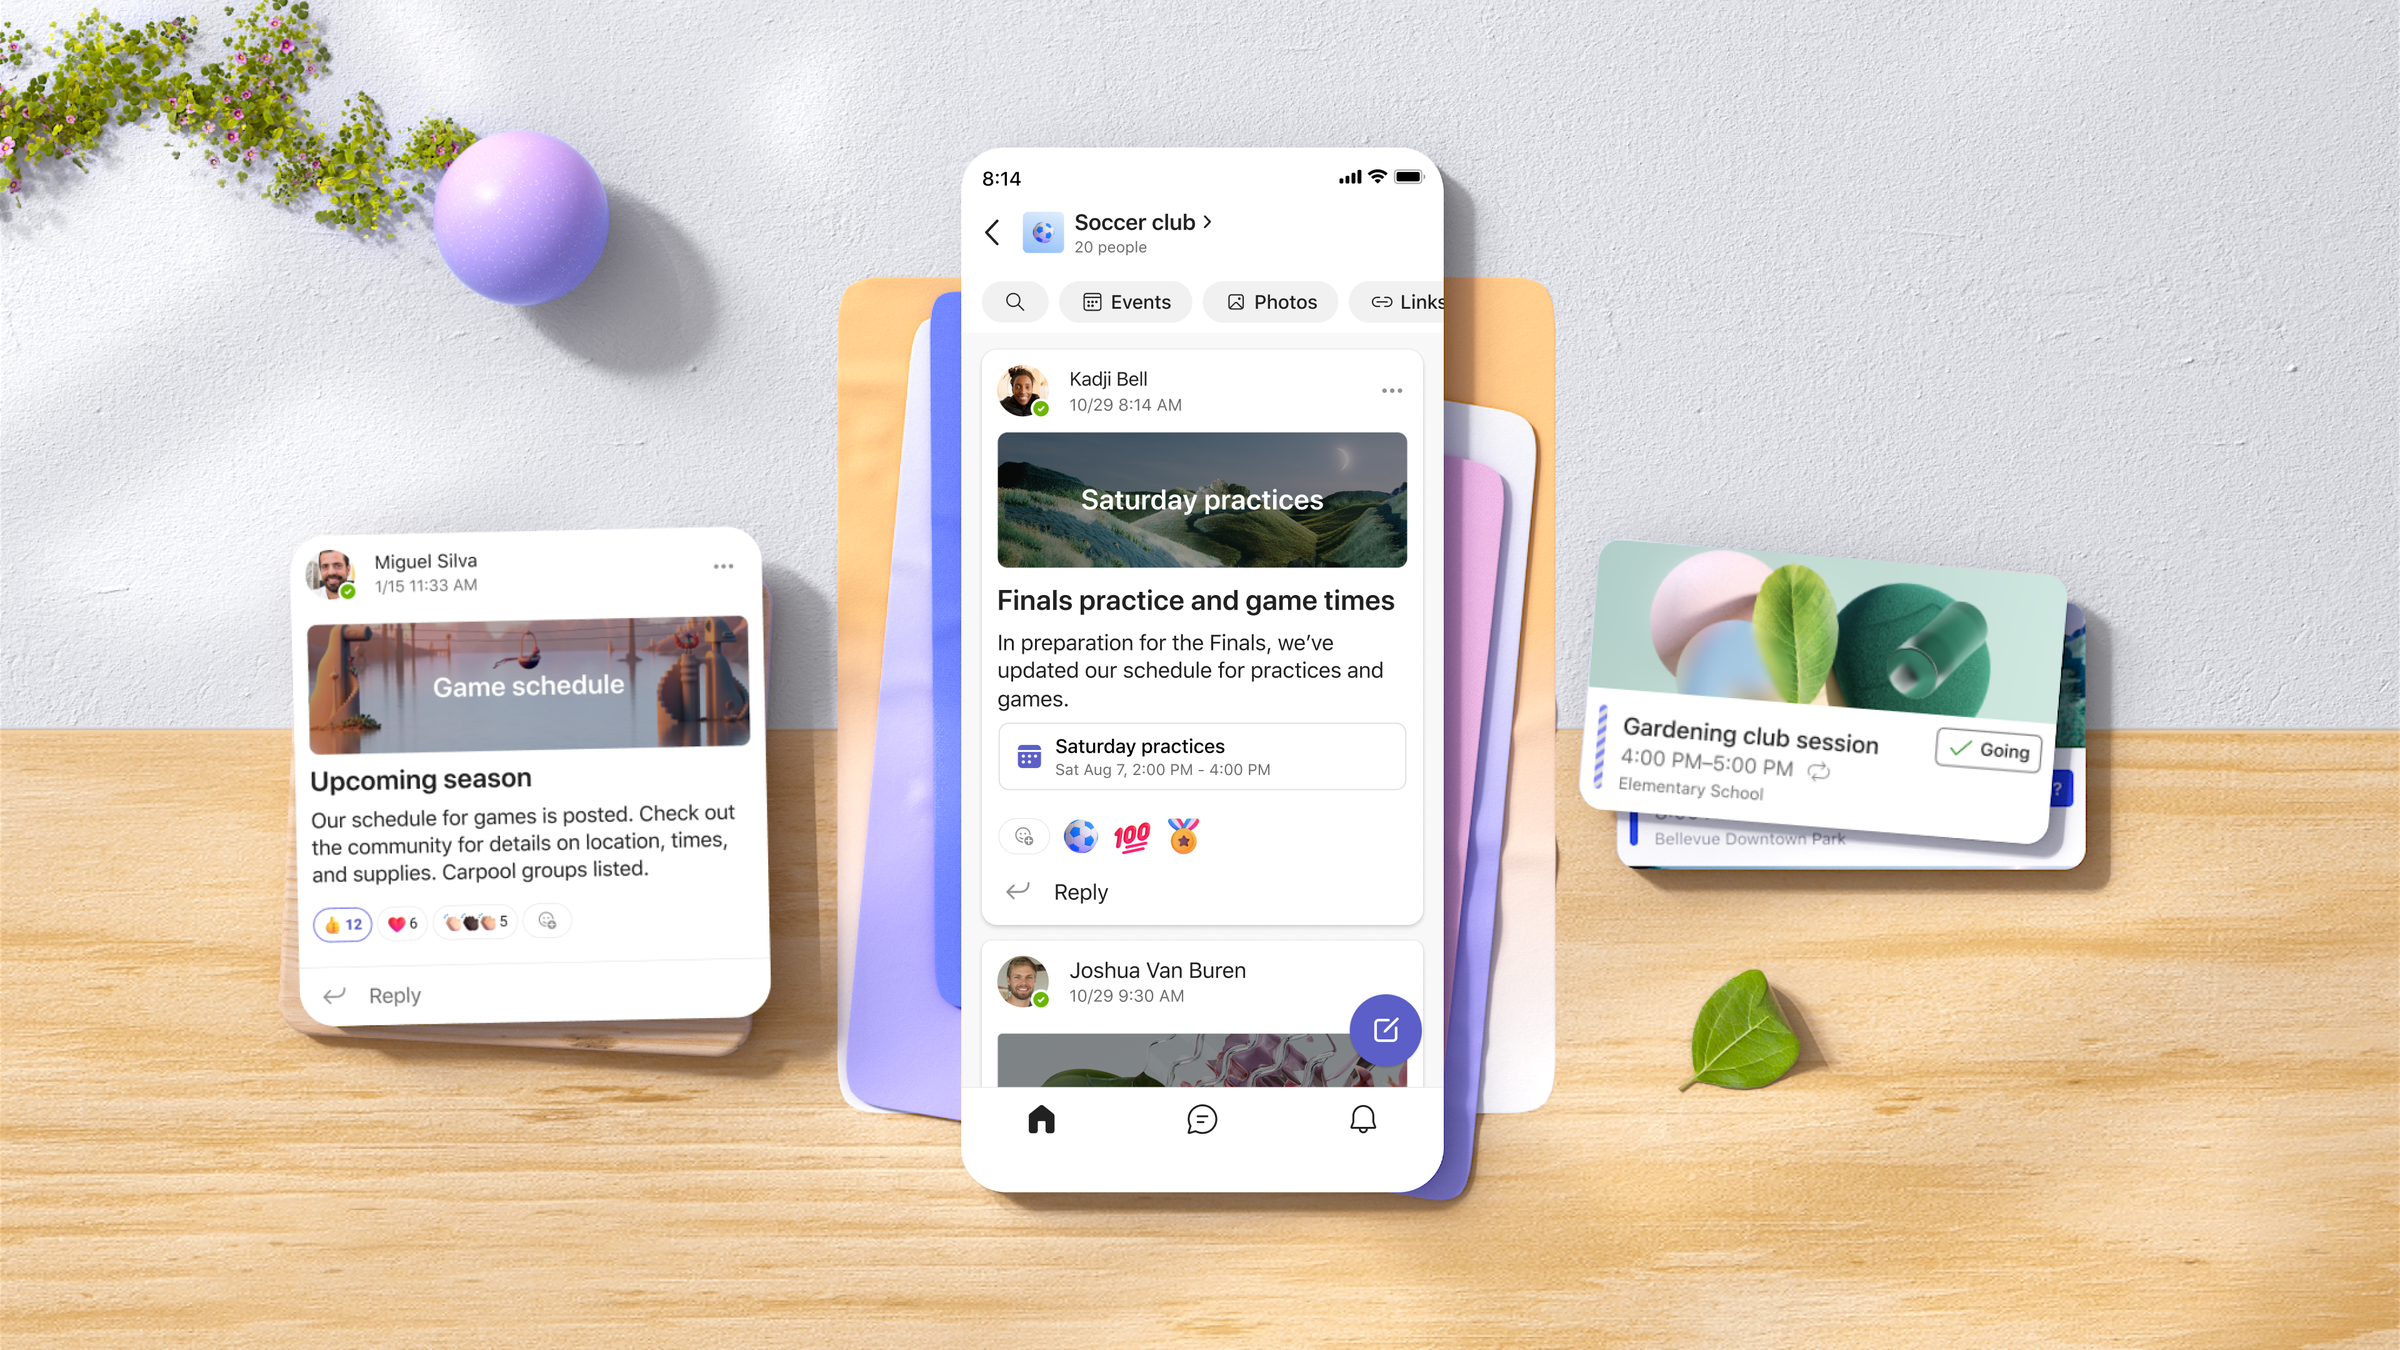 Microsoft Teams’ new communities feature will be limited to mobile apps for now.